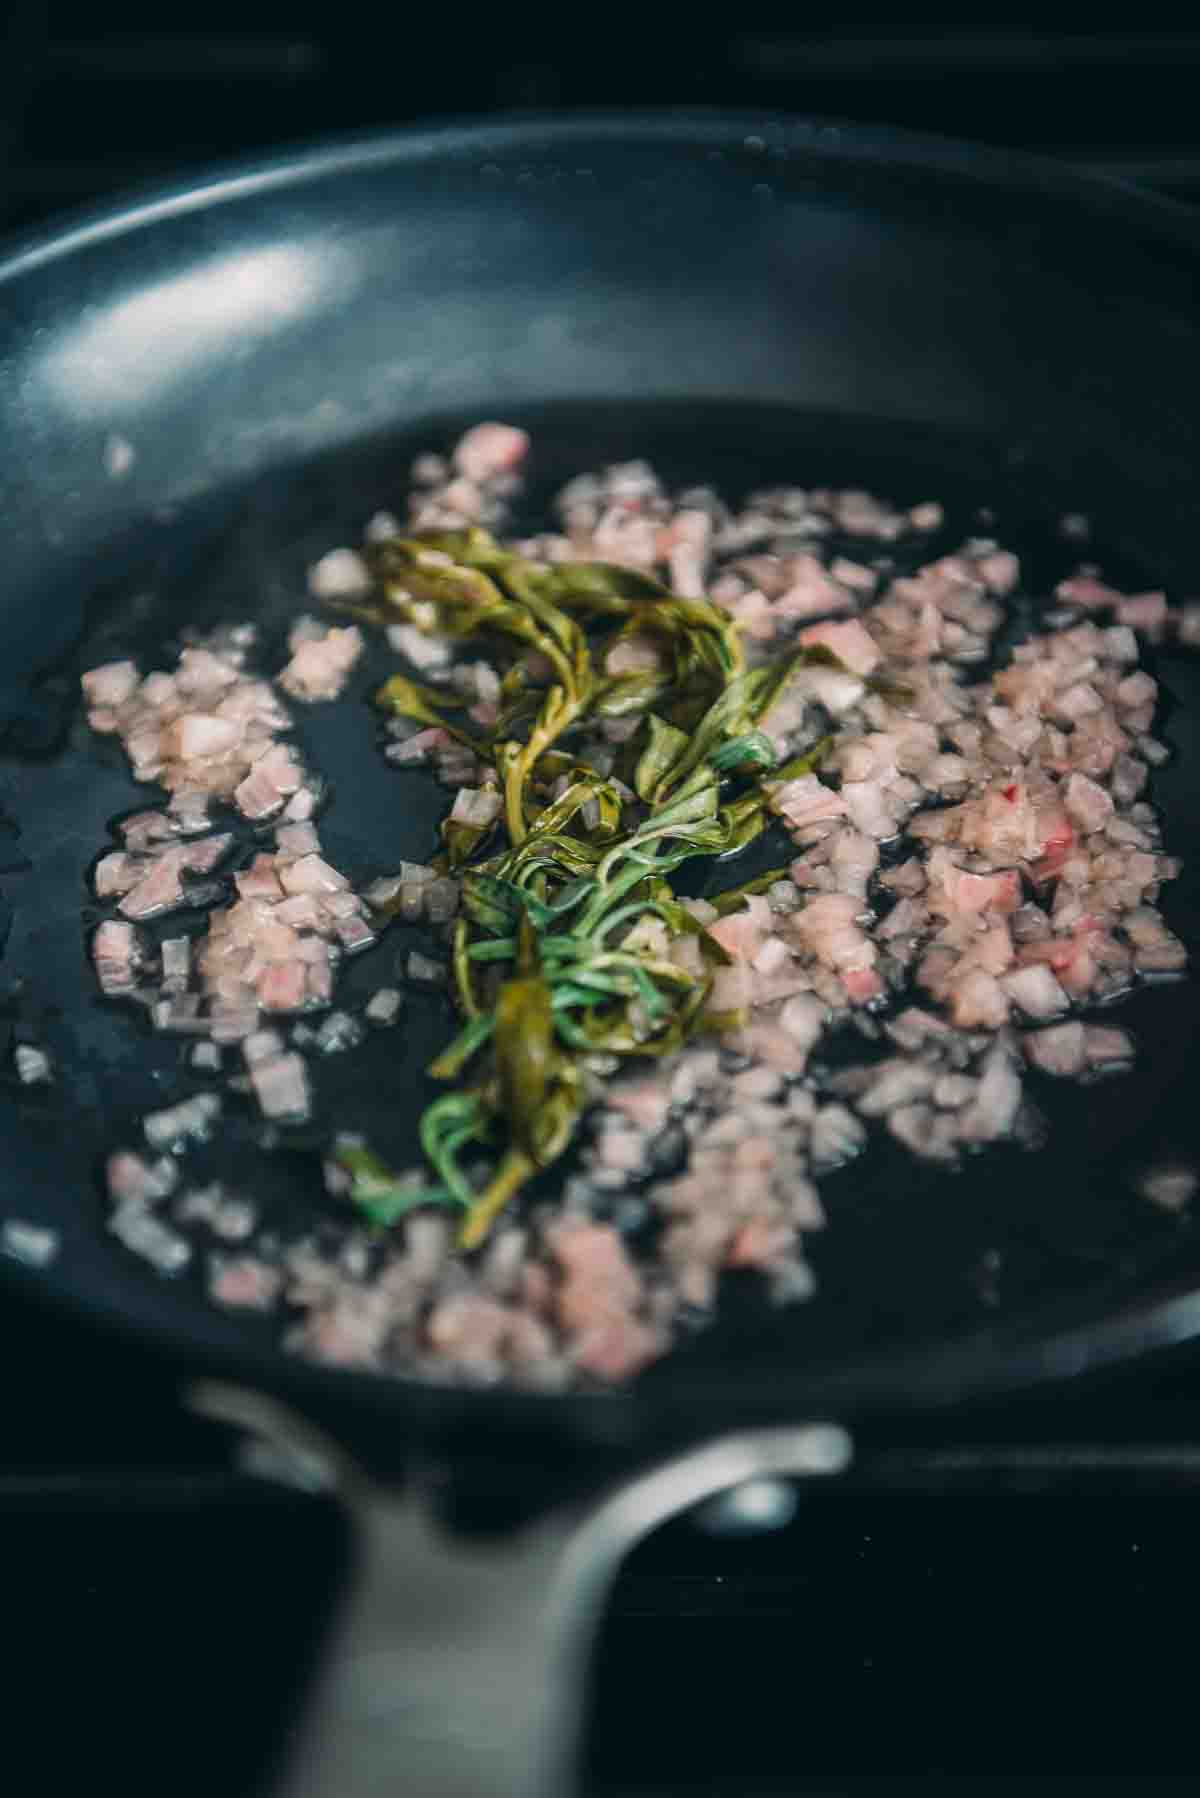 Tarragon cooked down in a pan.